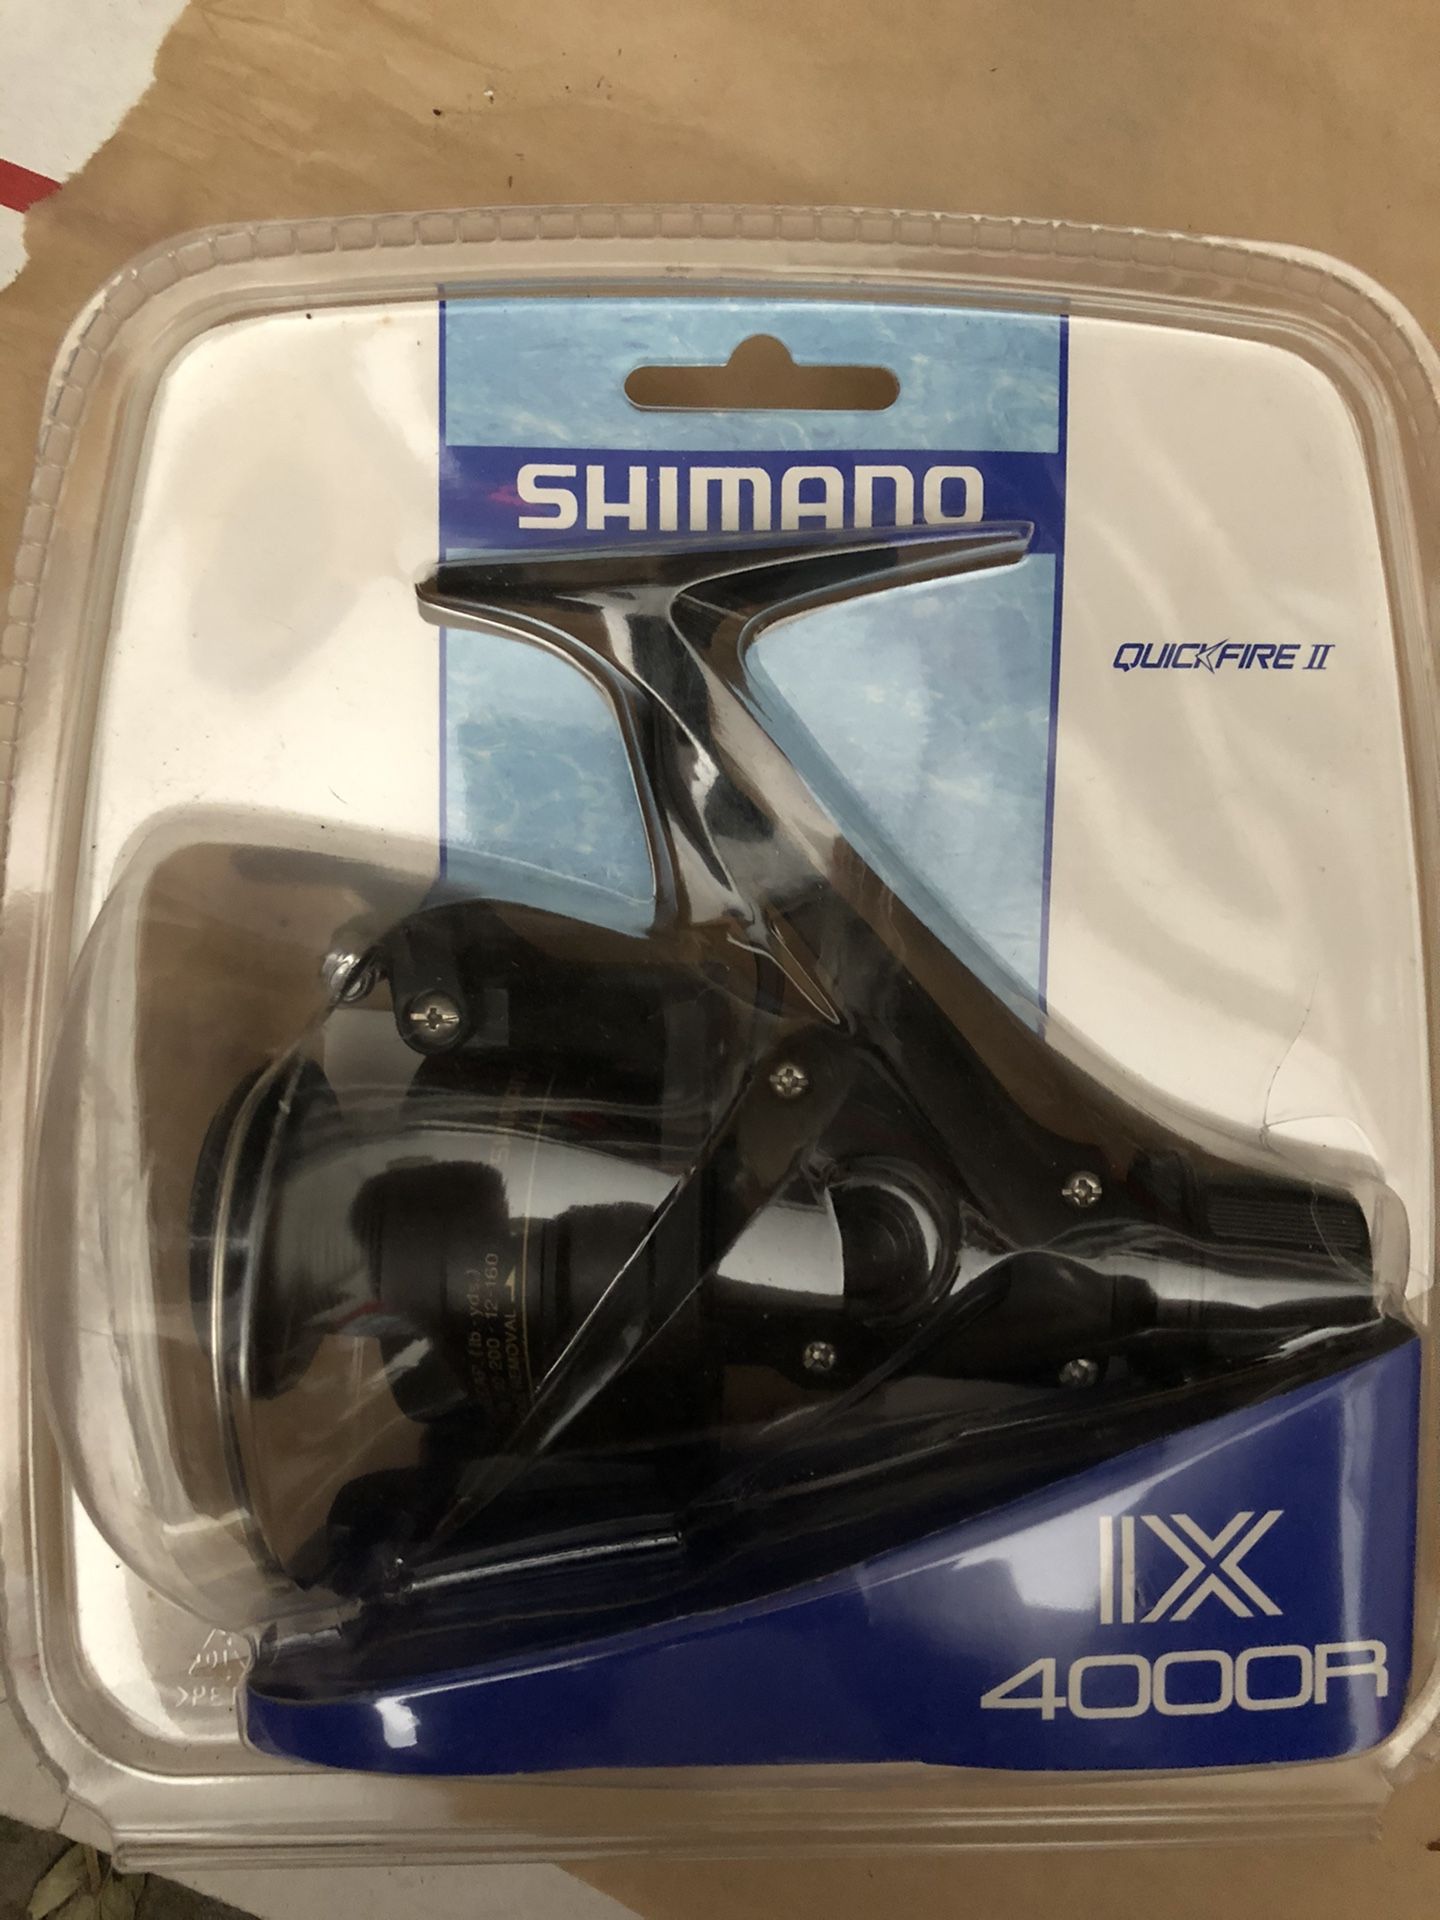 Brand new and unopened Shimano spinning fishing reel